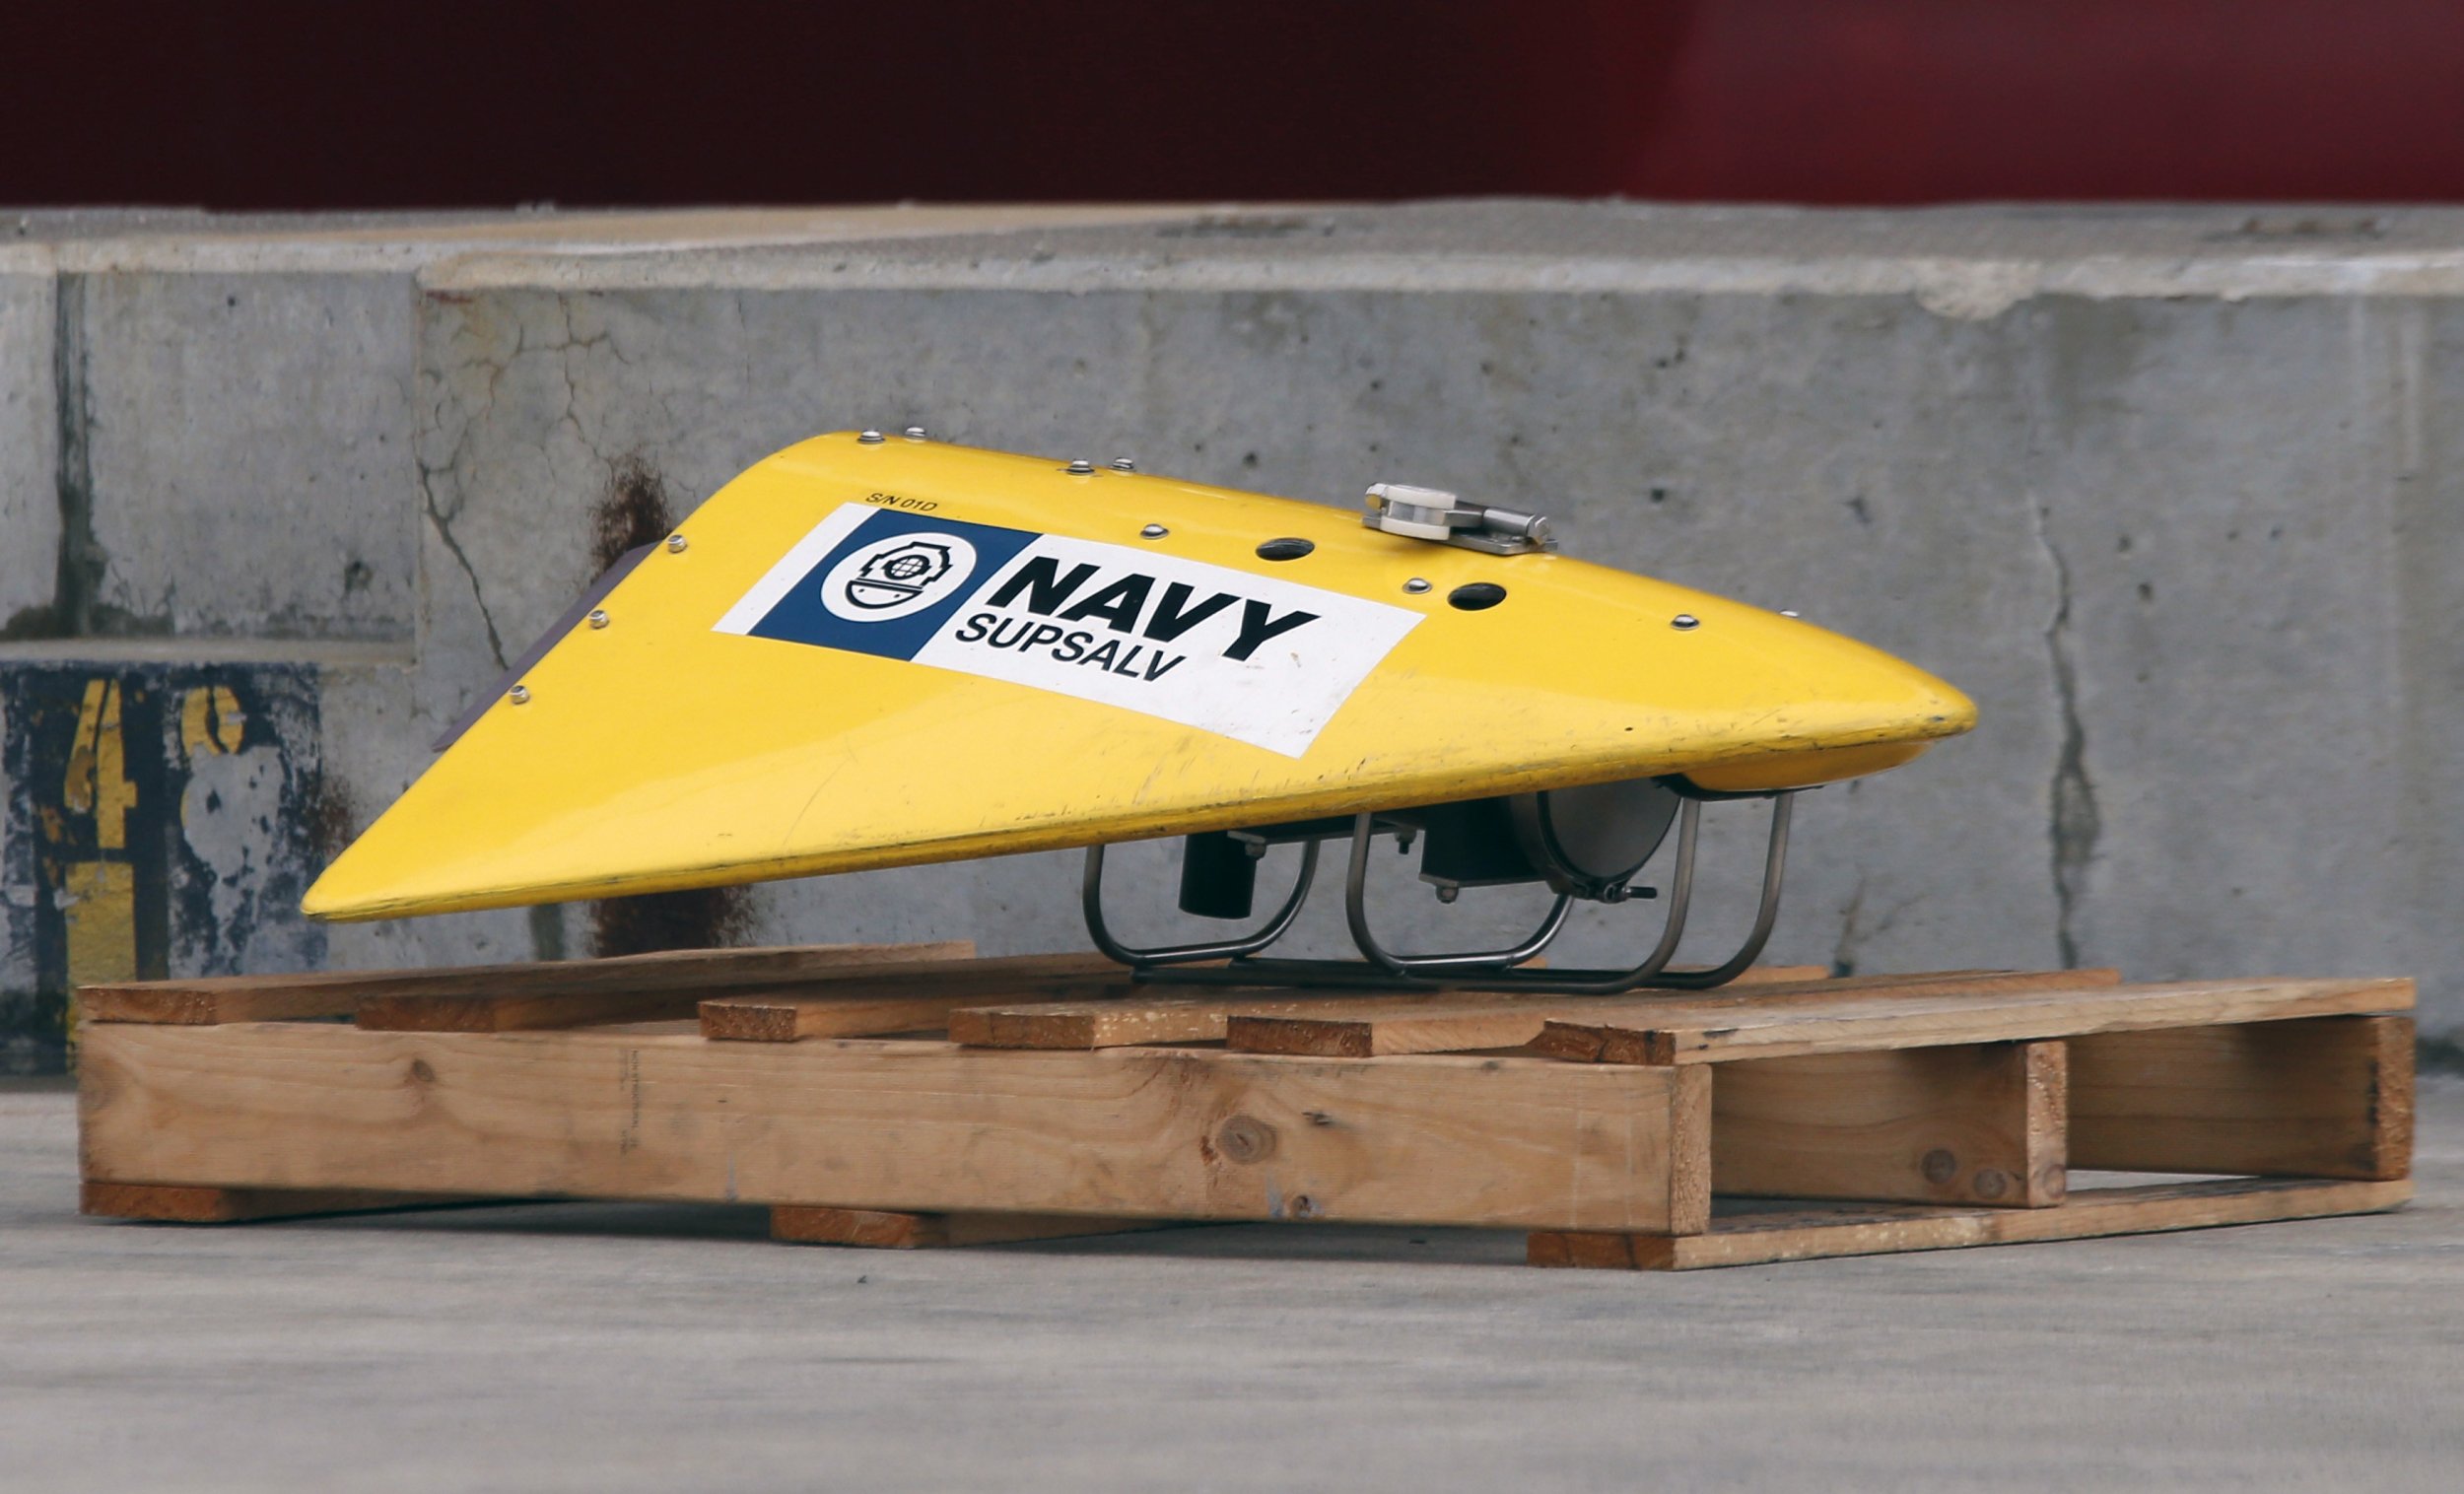 MH370 towed pinger locator March 30